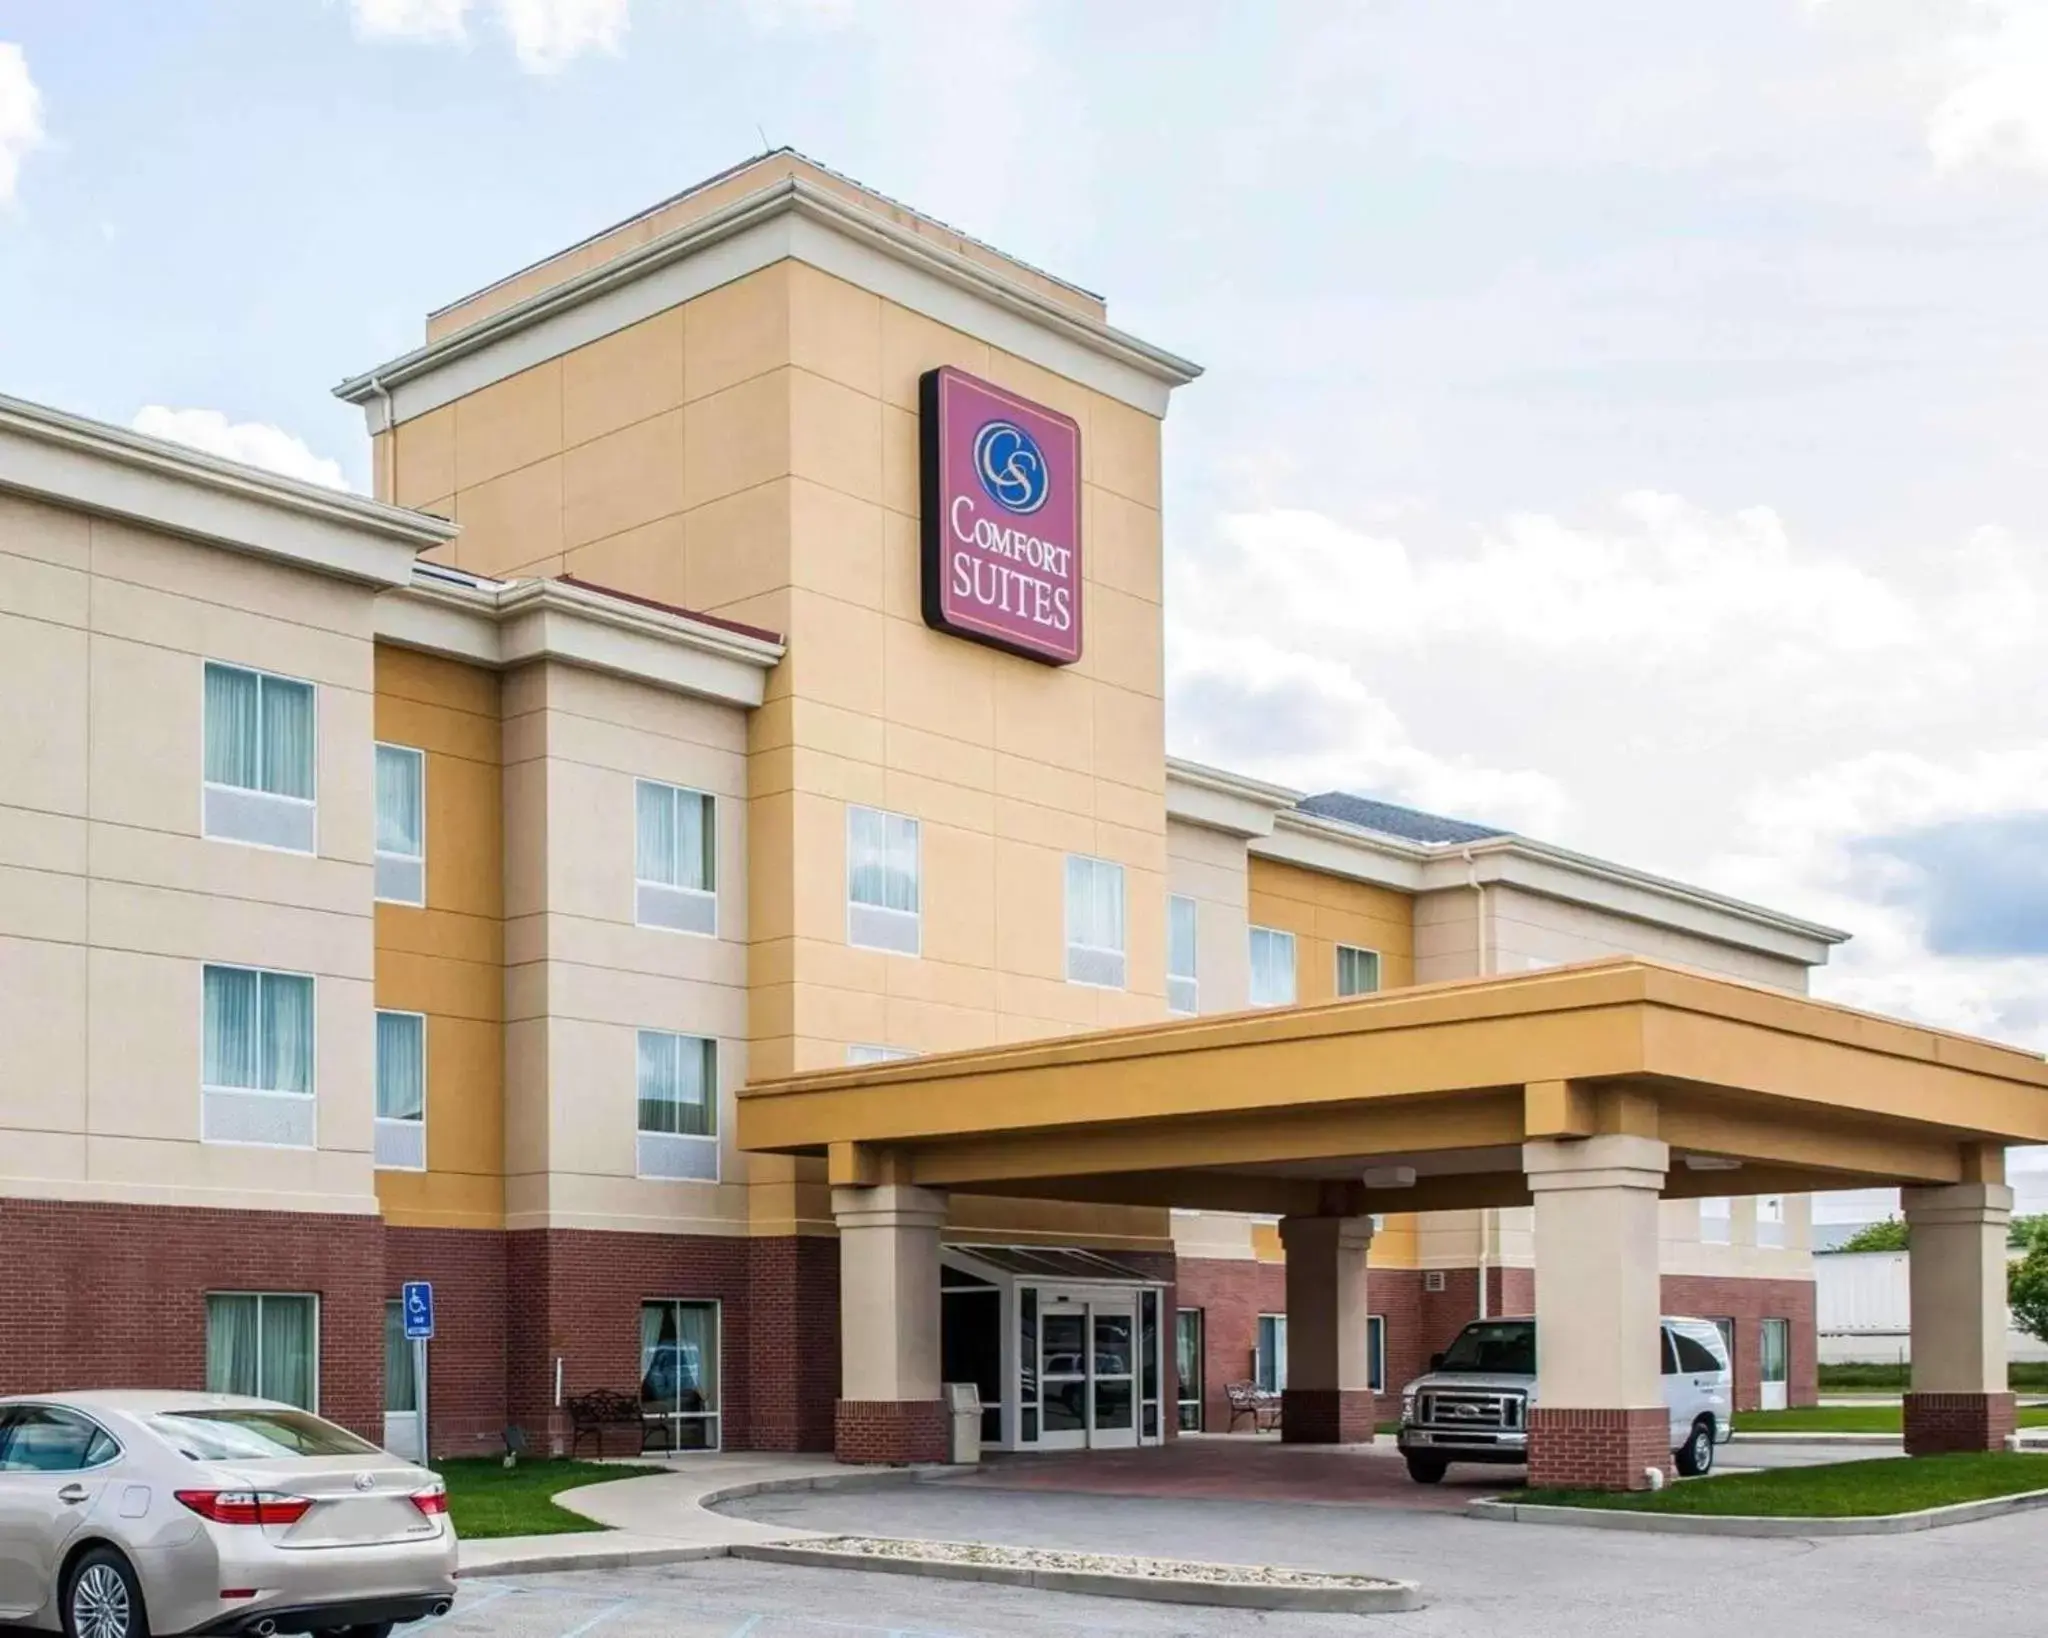 Property building in Comfort Suites near Indianapolis Airport